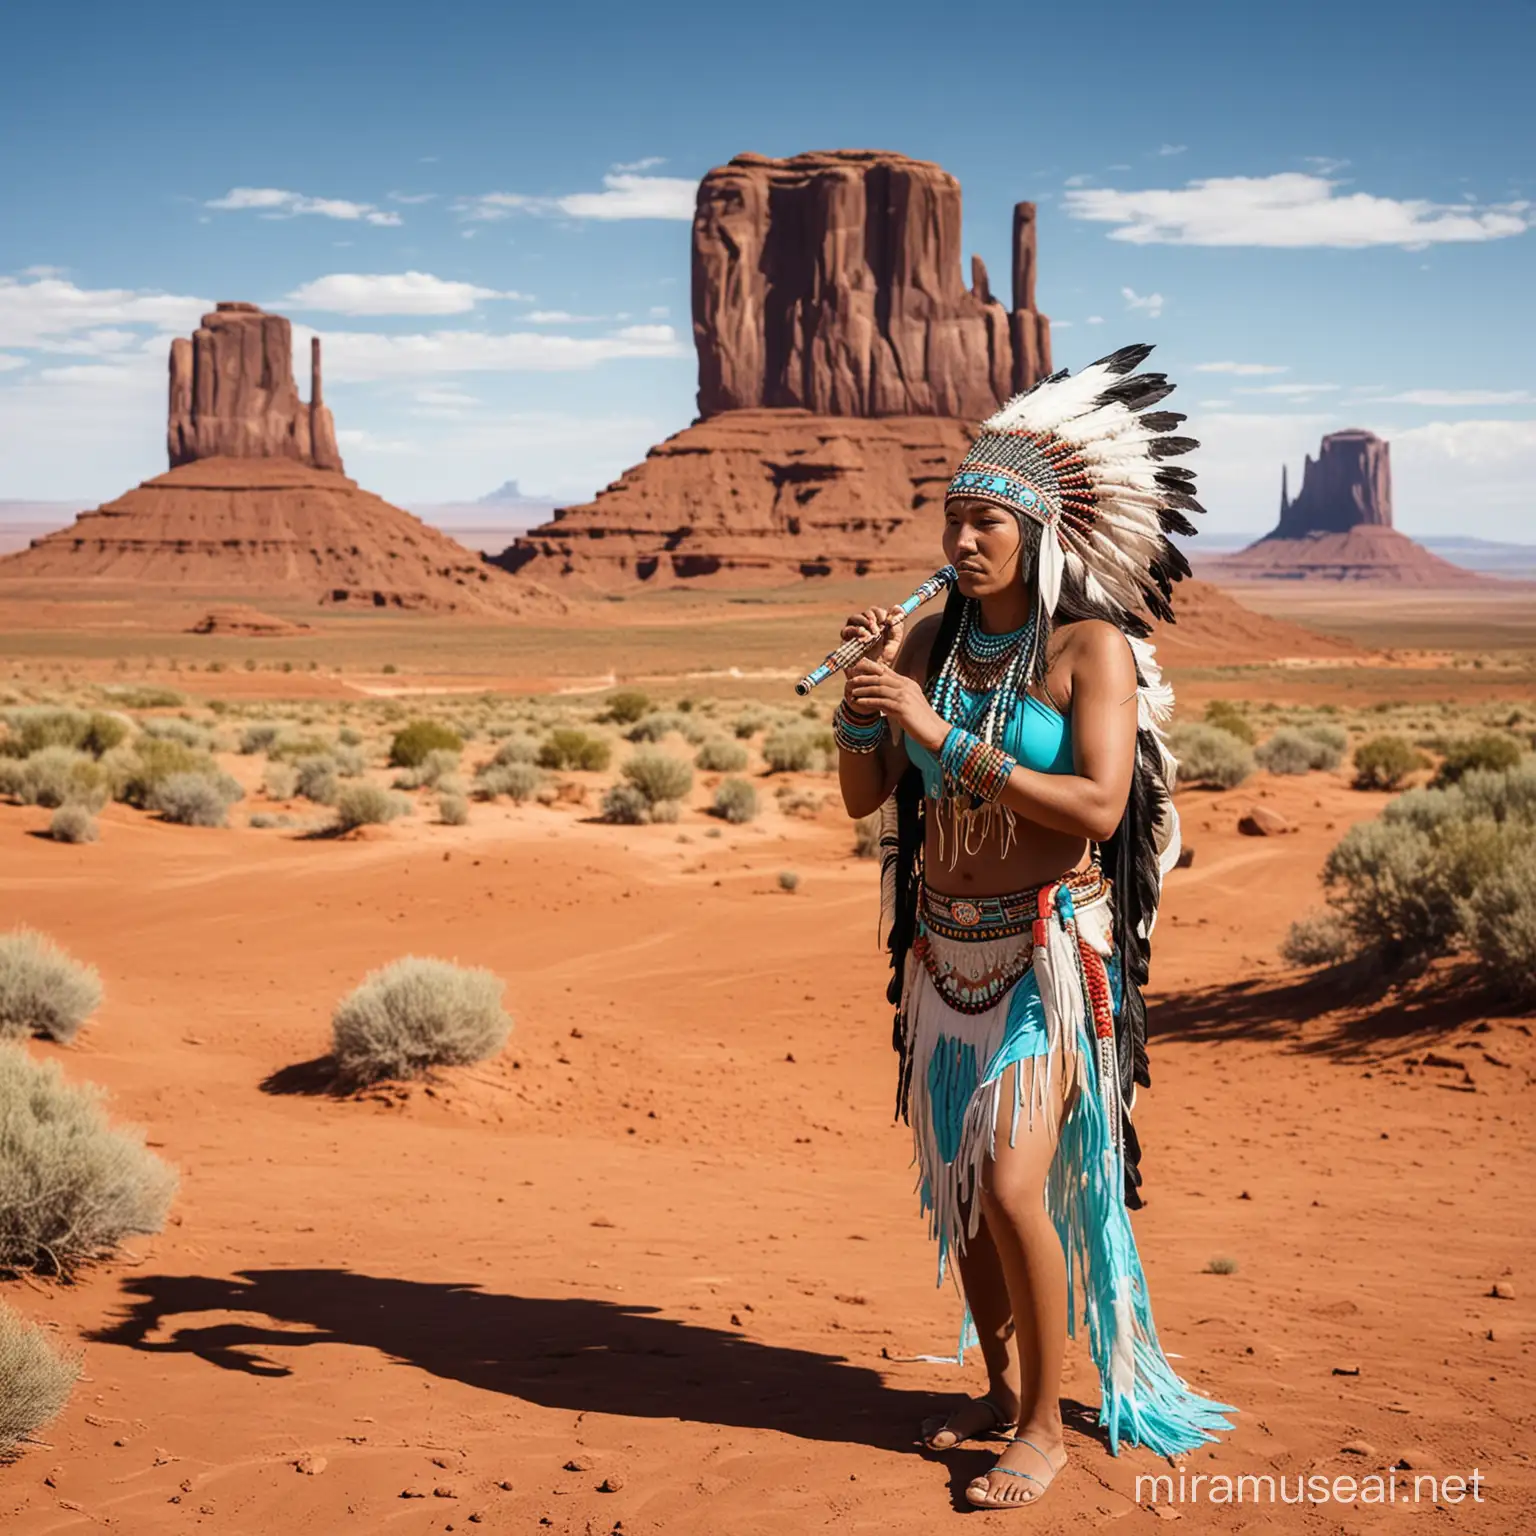 monument valley, native American wearing turquoise bracelet, feather headdress, playing flute